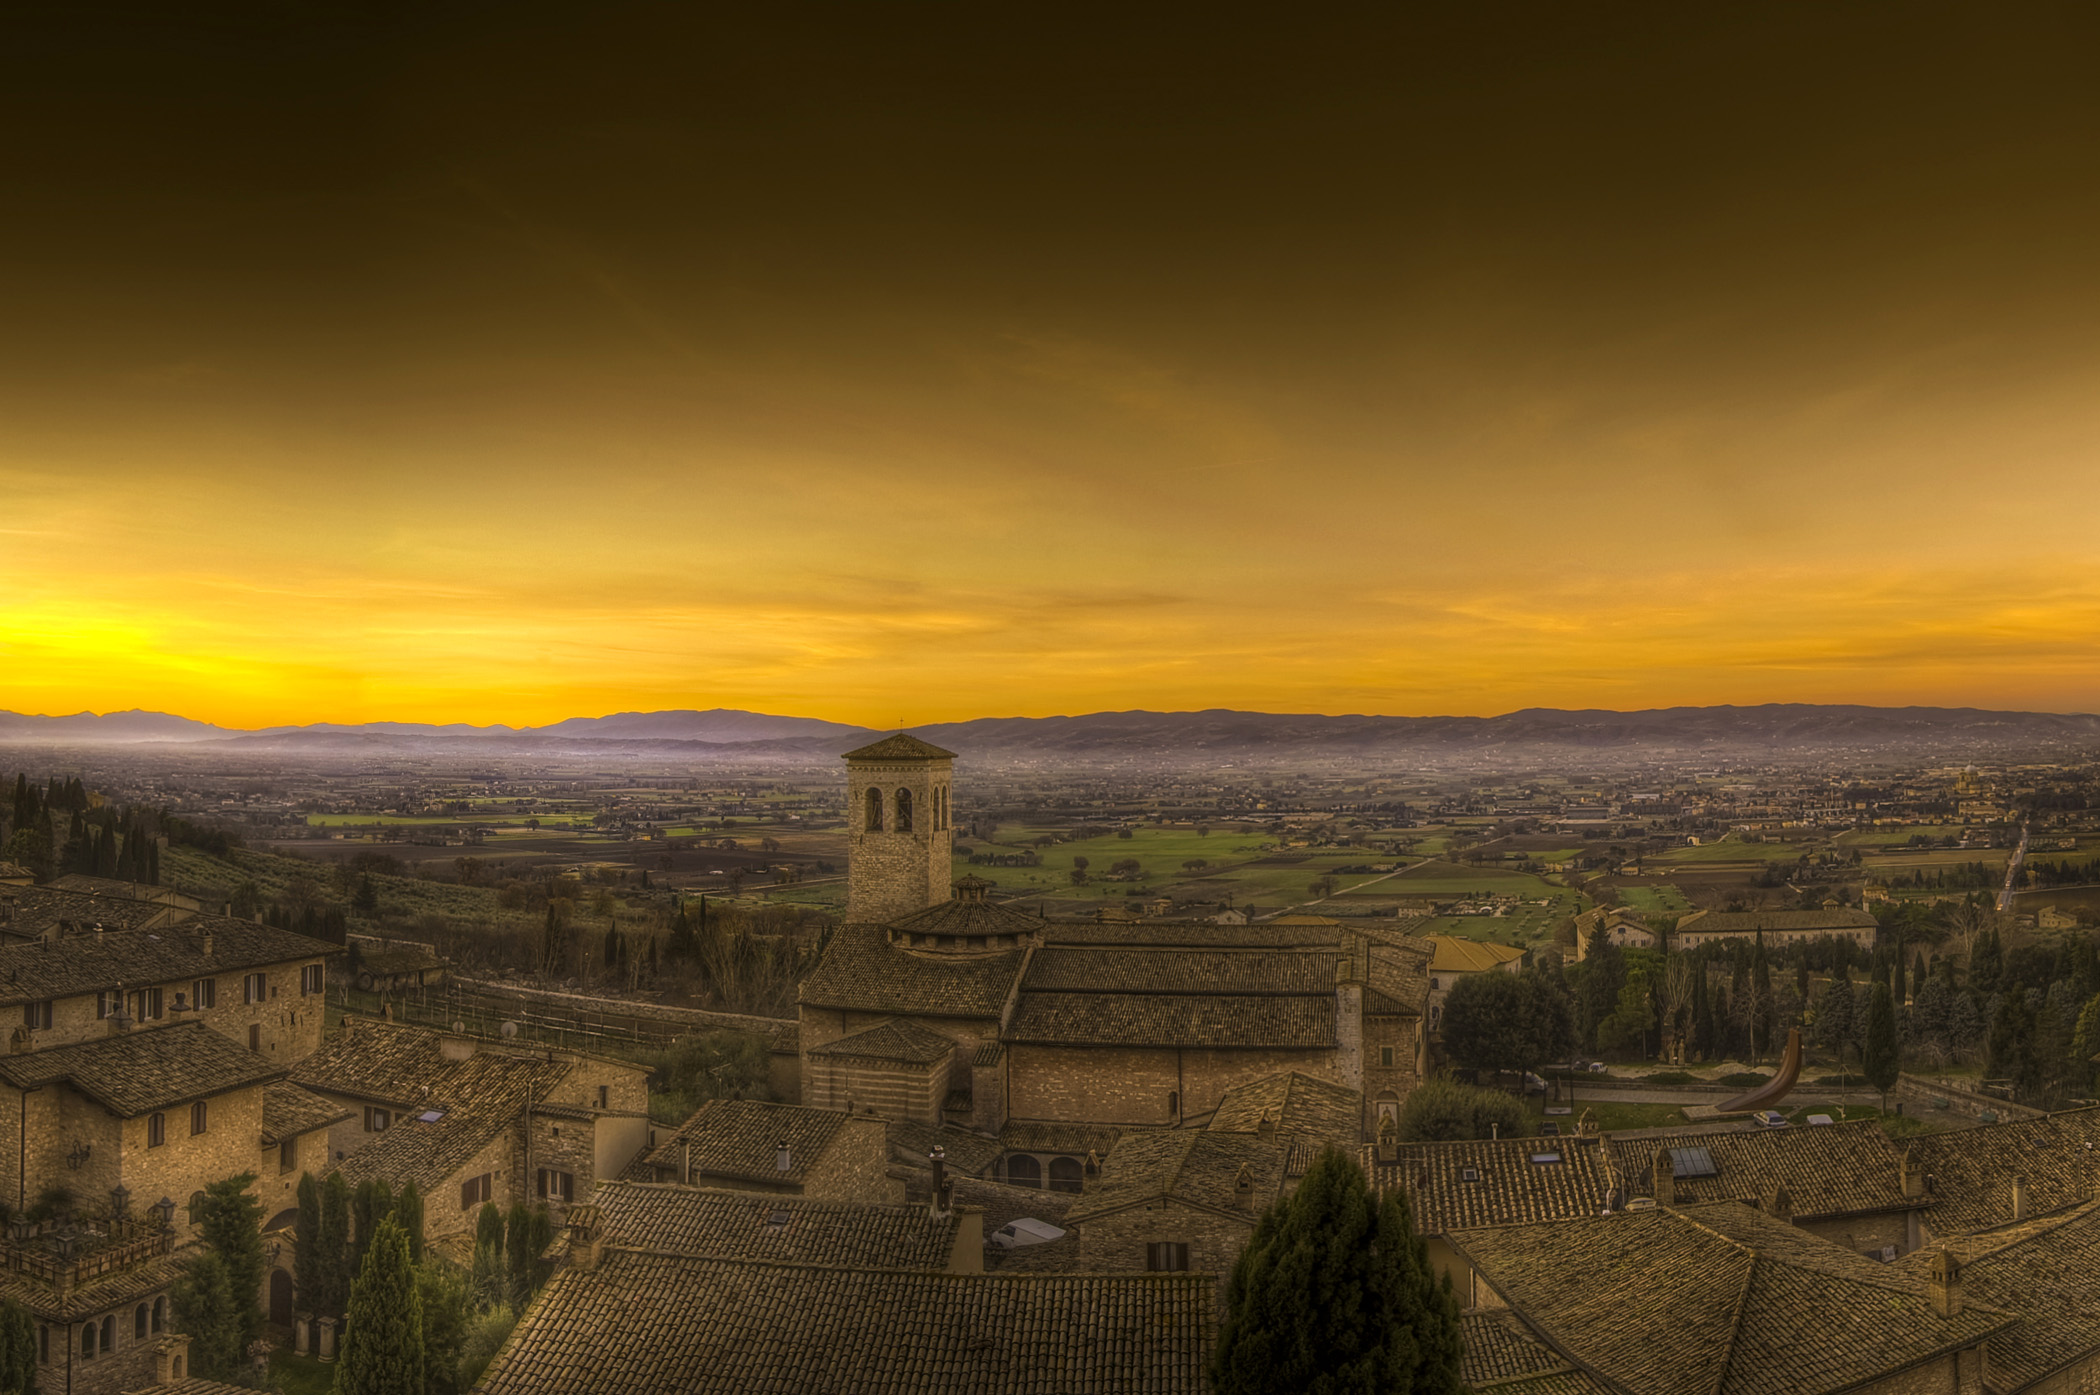 Dawn breaks across the valley below the ancient walled city of Assisi, Italy  on a December morning and mist lays upon the valley floor.